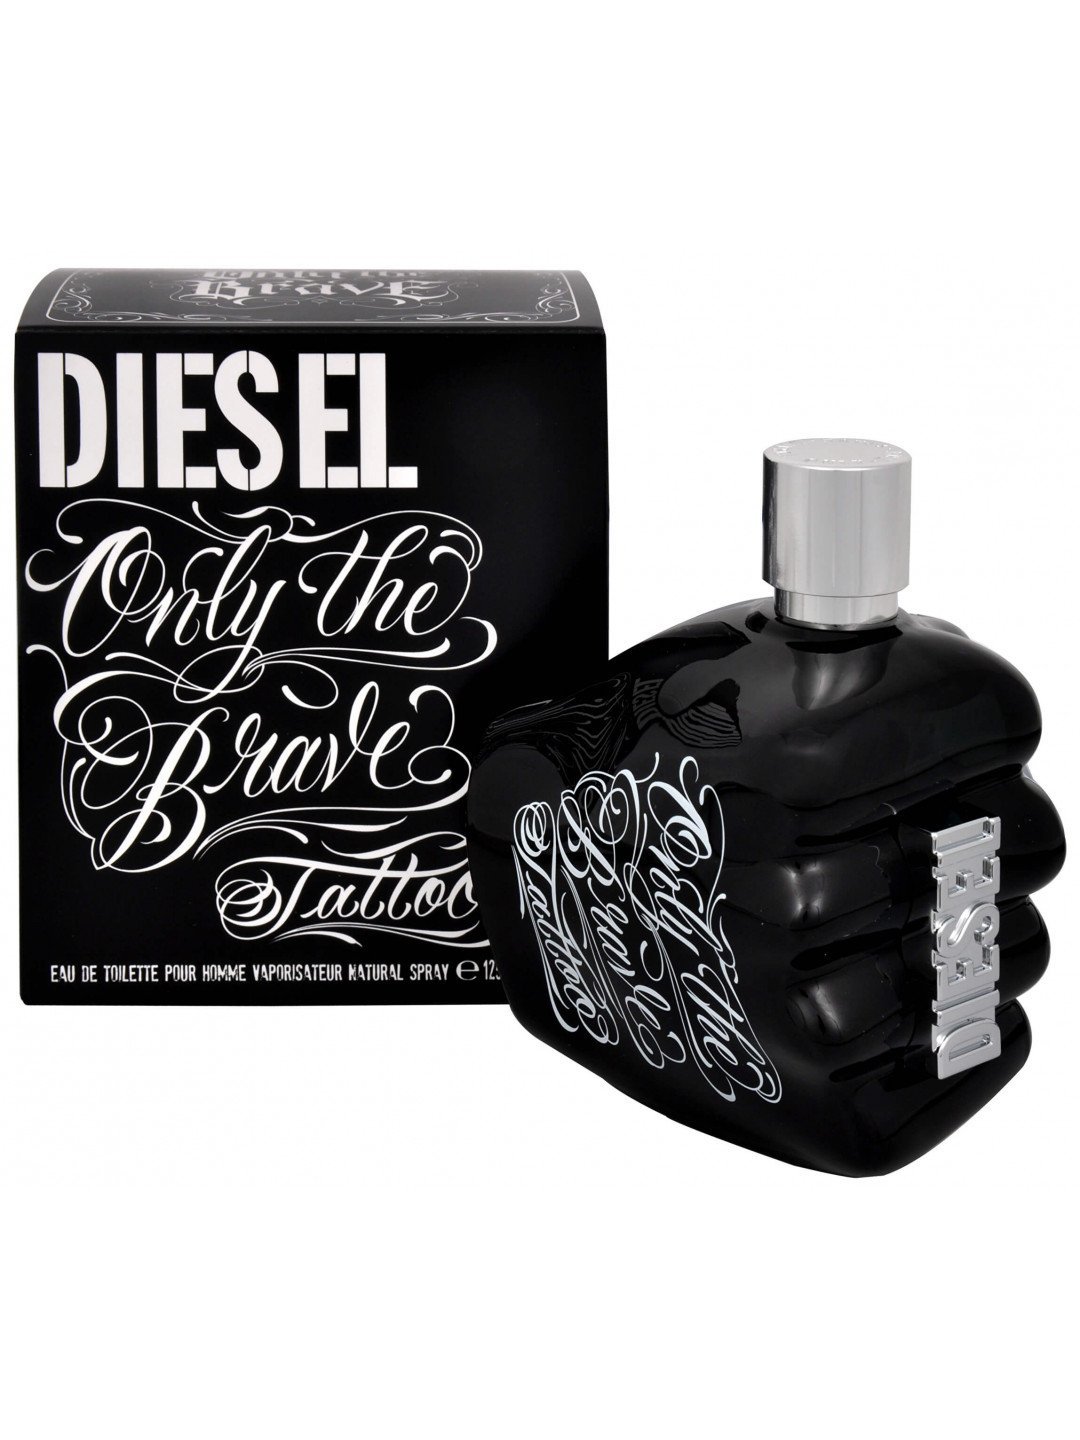 Diesel Only The Brave Tattoo – EDT 50 ml